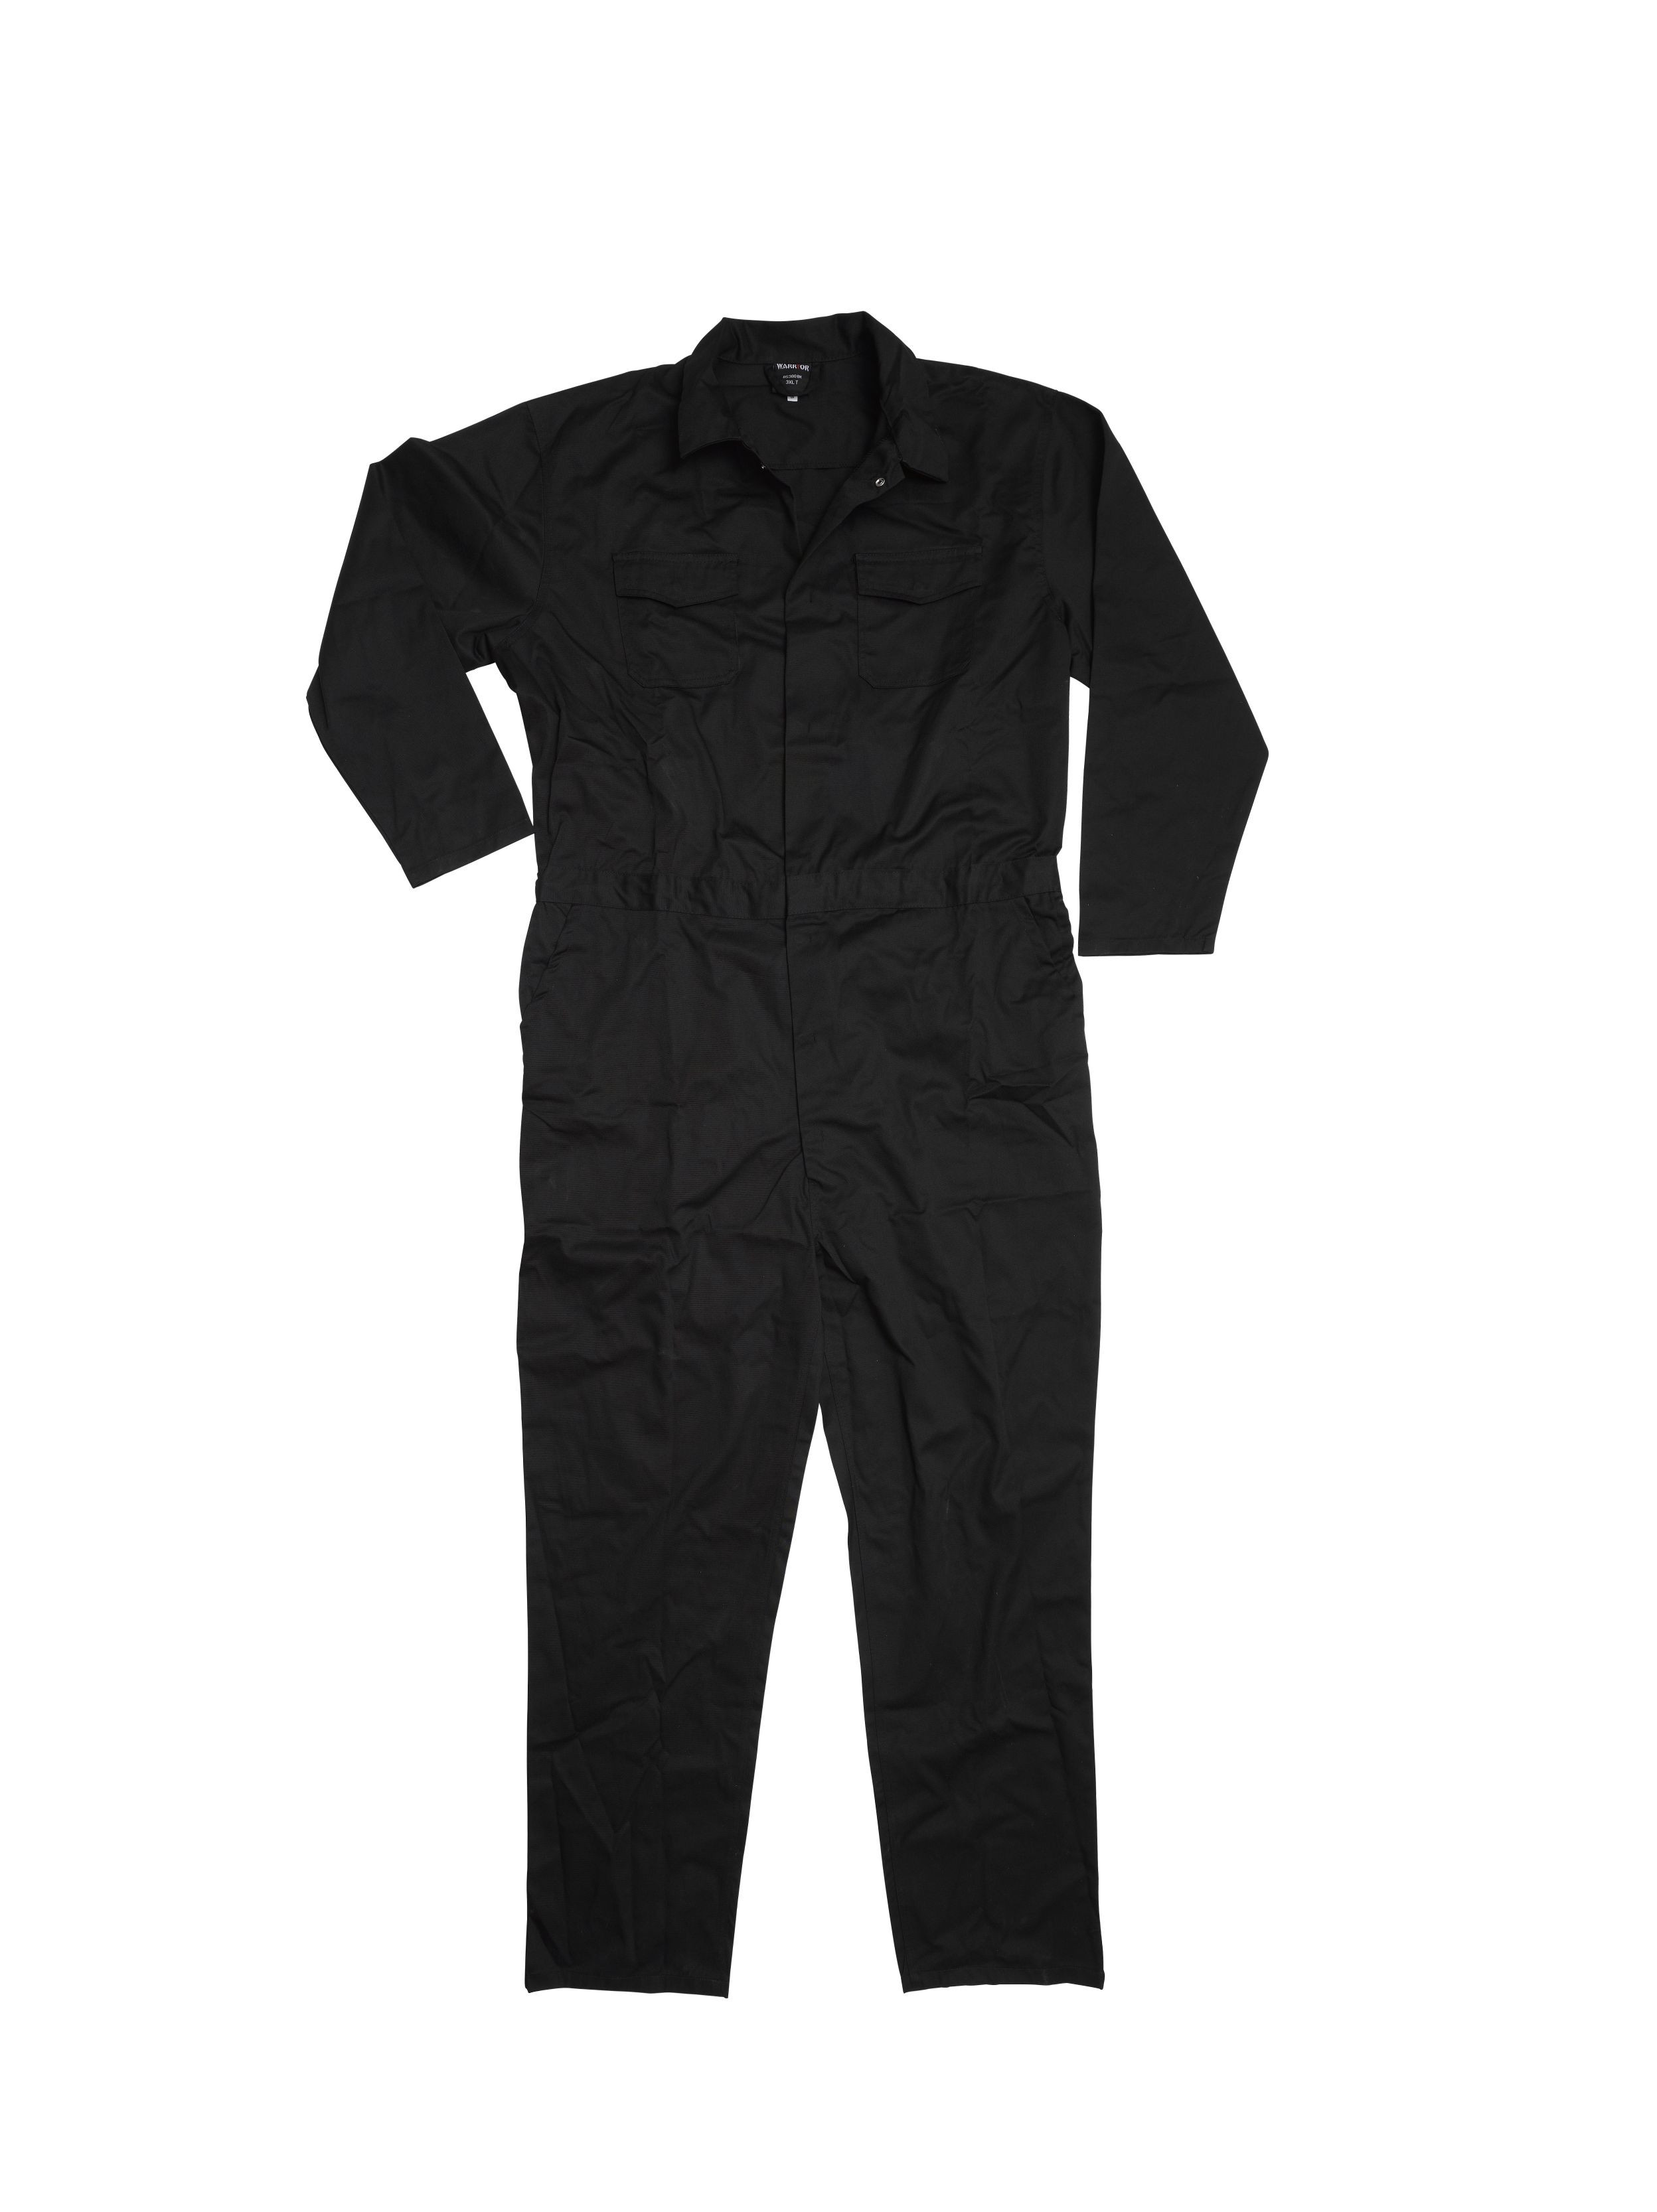 STUD FRONT COVERALL | Warrior Protects